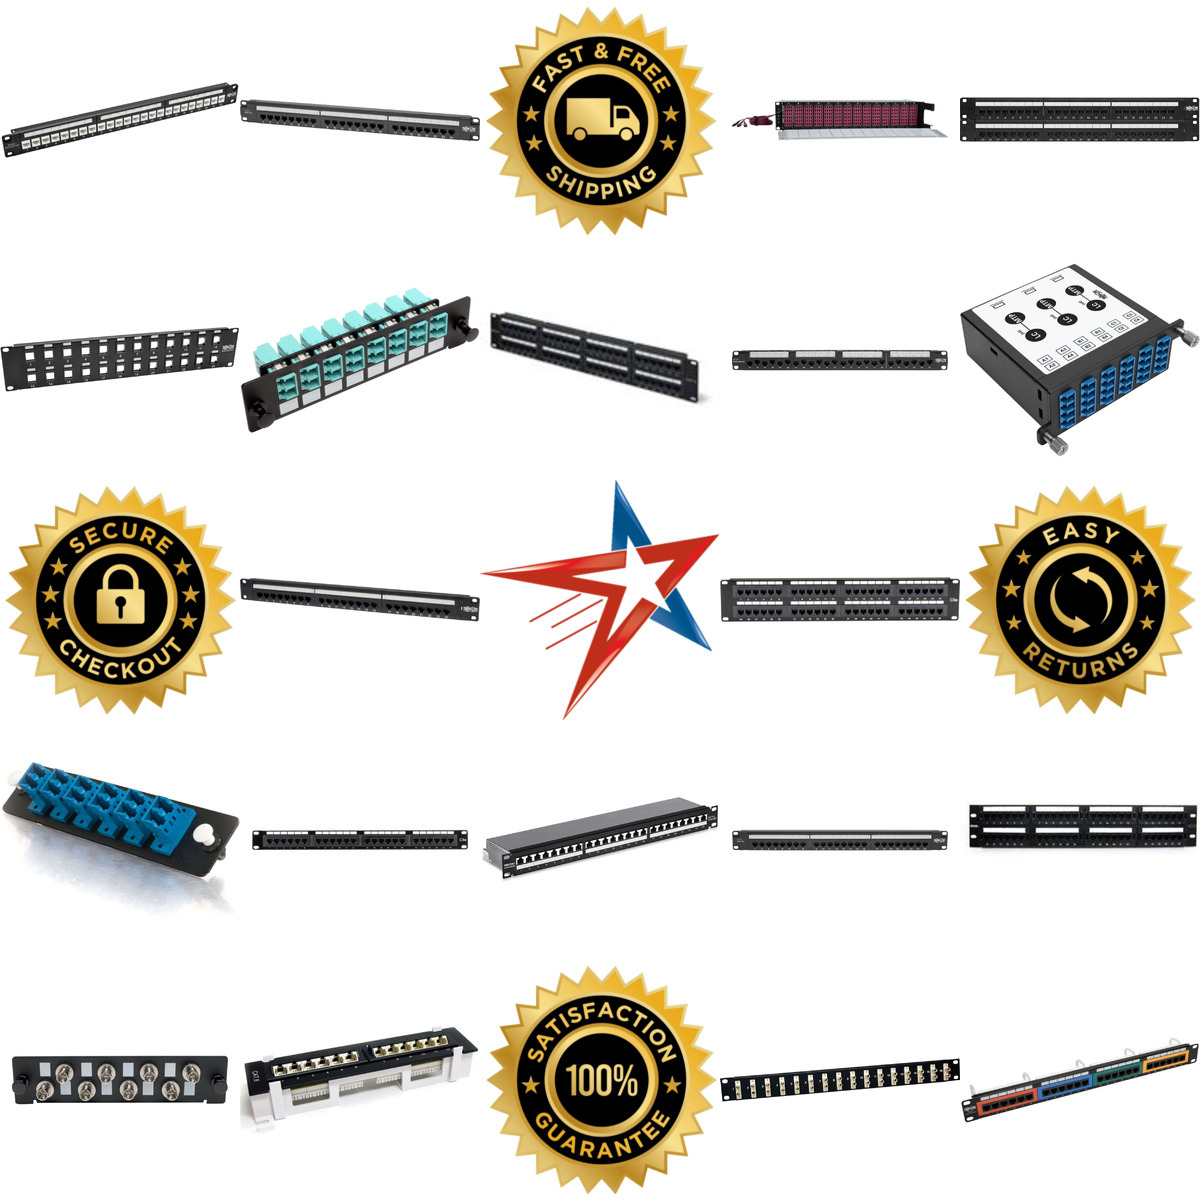 A selection of Patch Panels products on GoVets